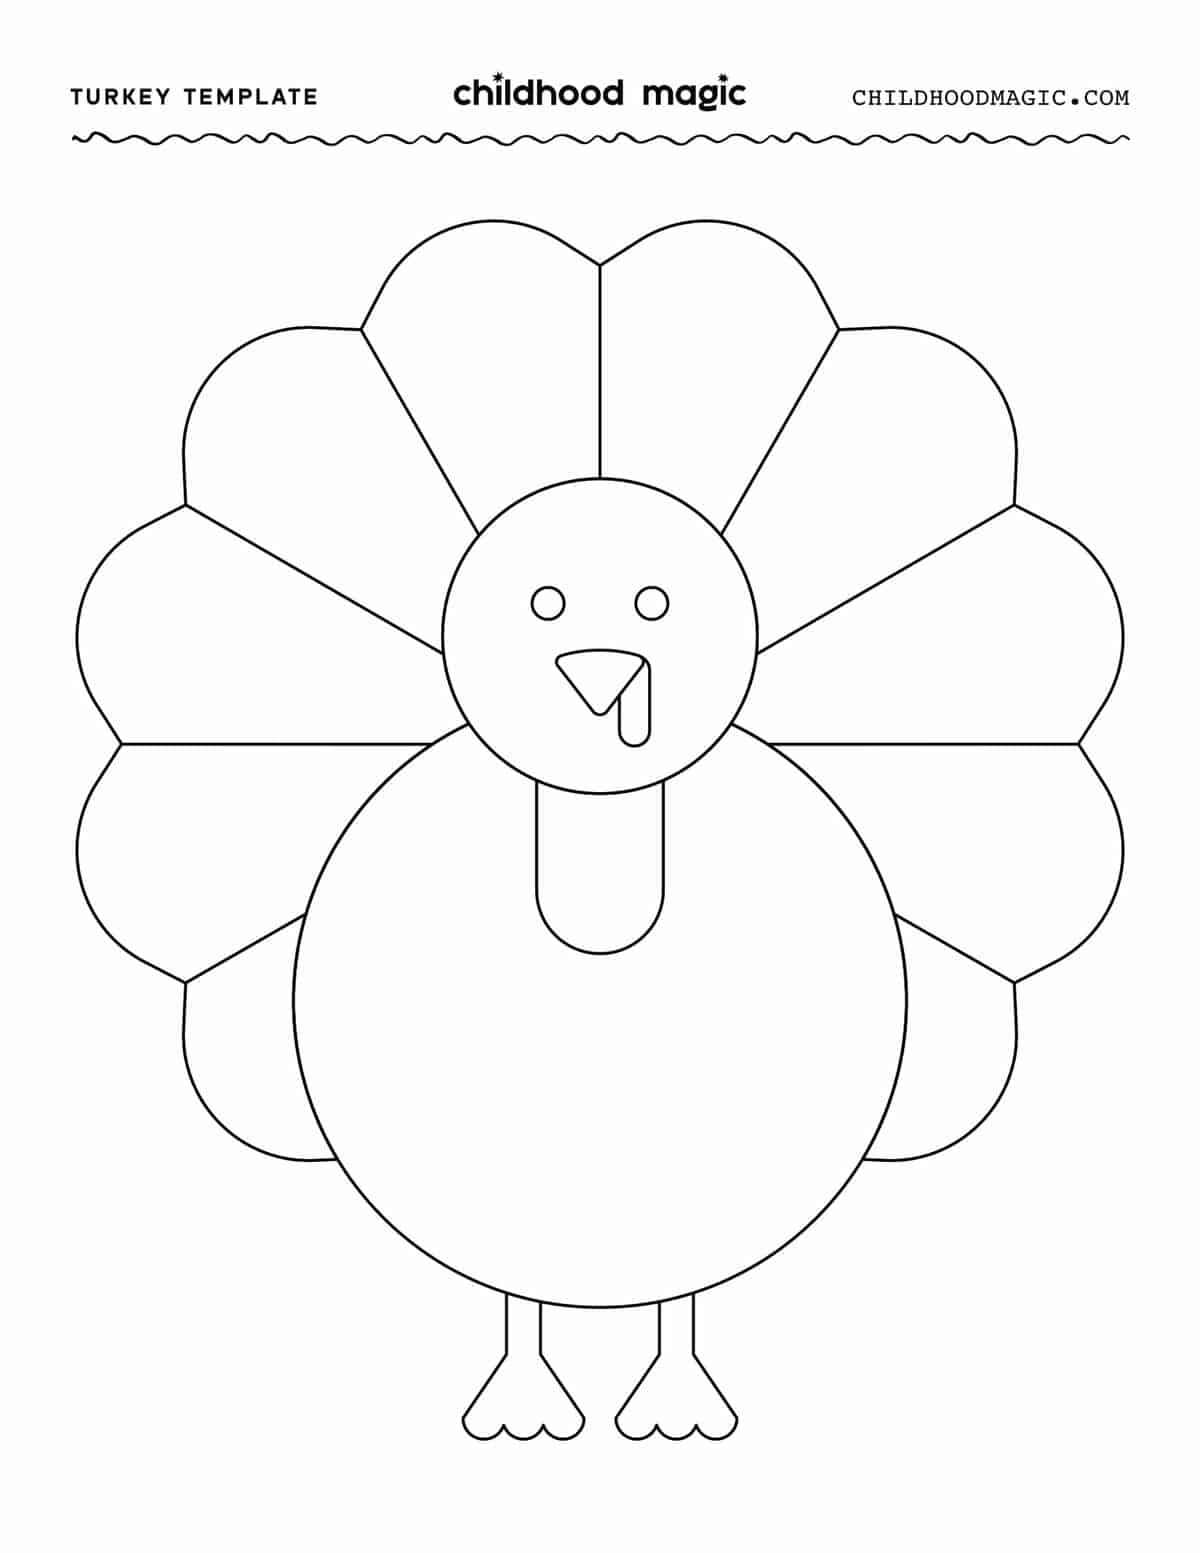 Paper Cup Turkey Templates, Free Printable Templates & Coloring Pages